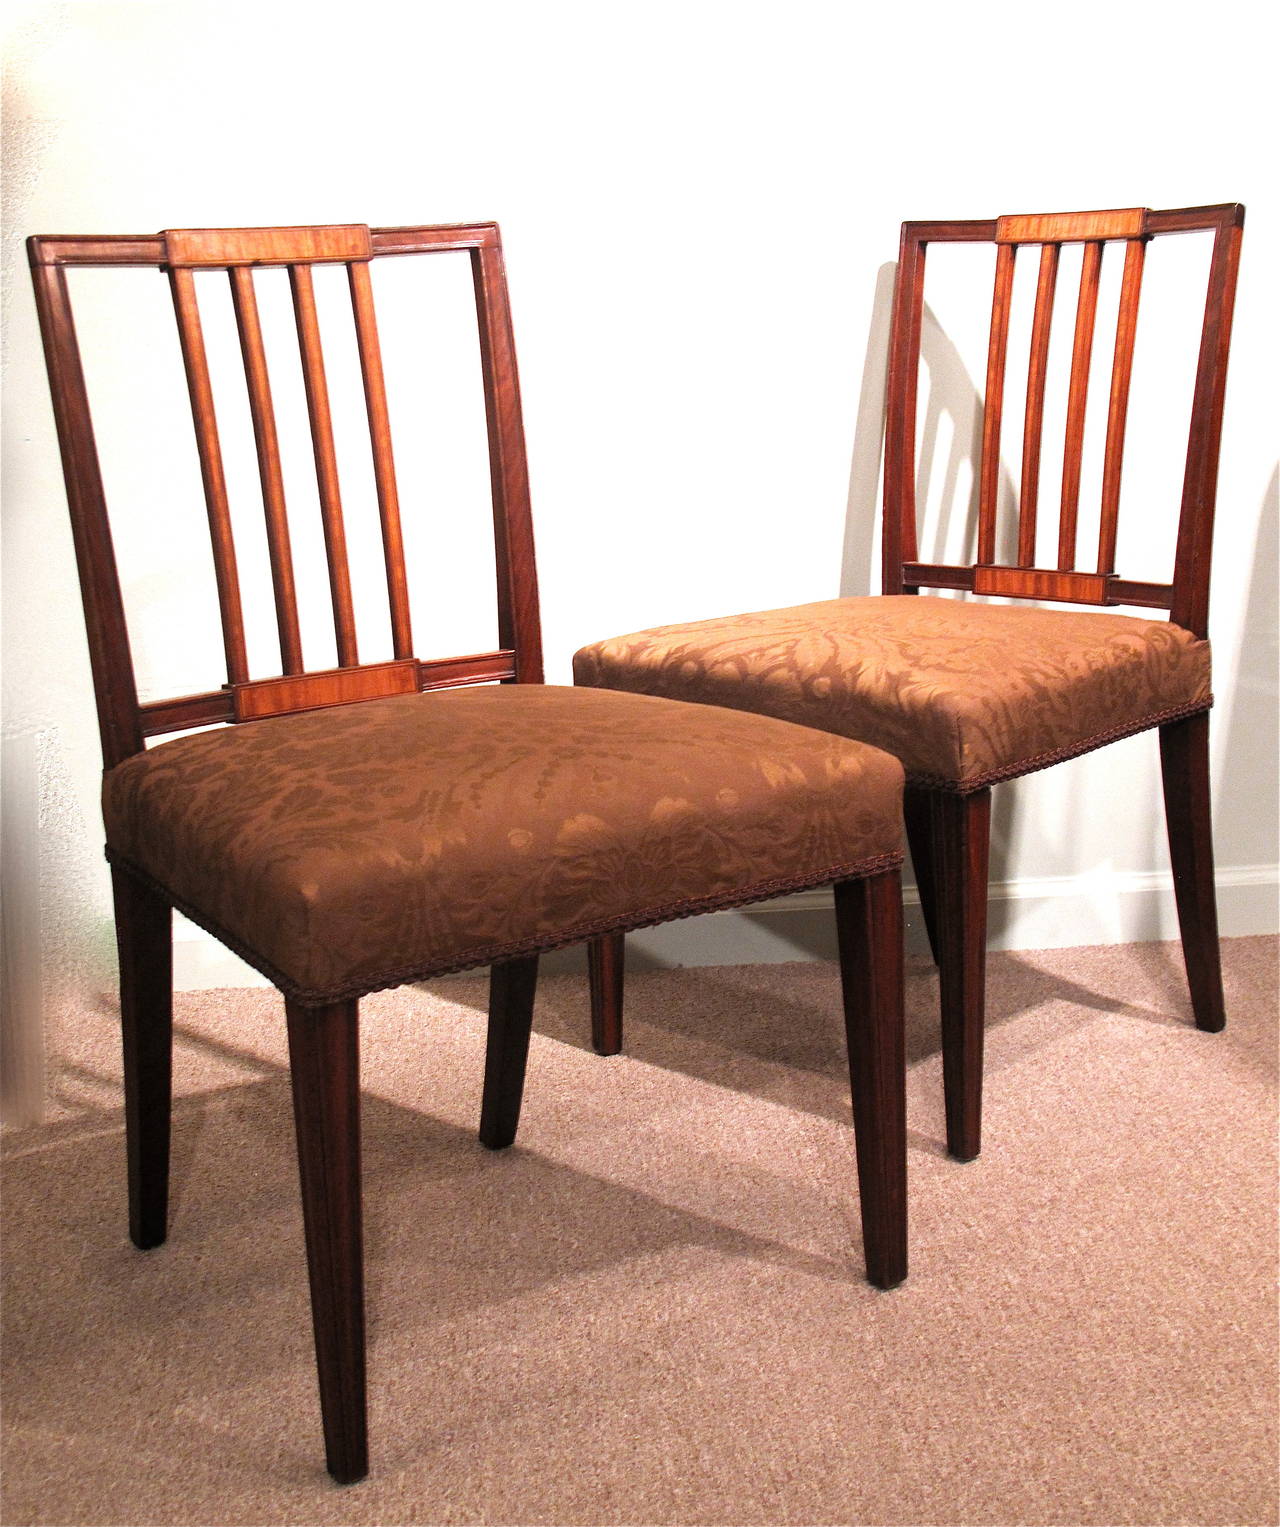 Set of Ten George III Dining Chairs in Mahogany and Satinwood, Late 18th Century For Sale 1